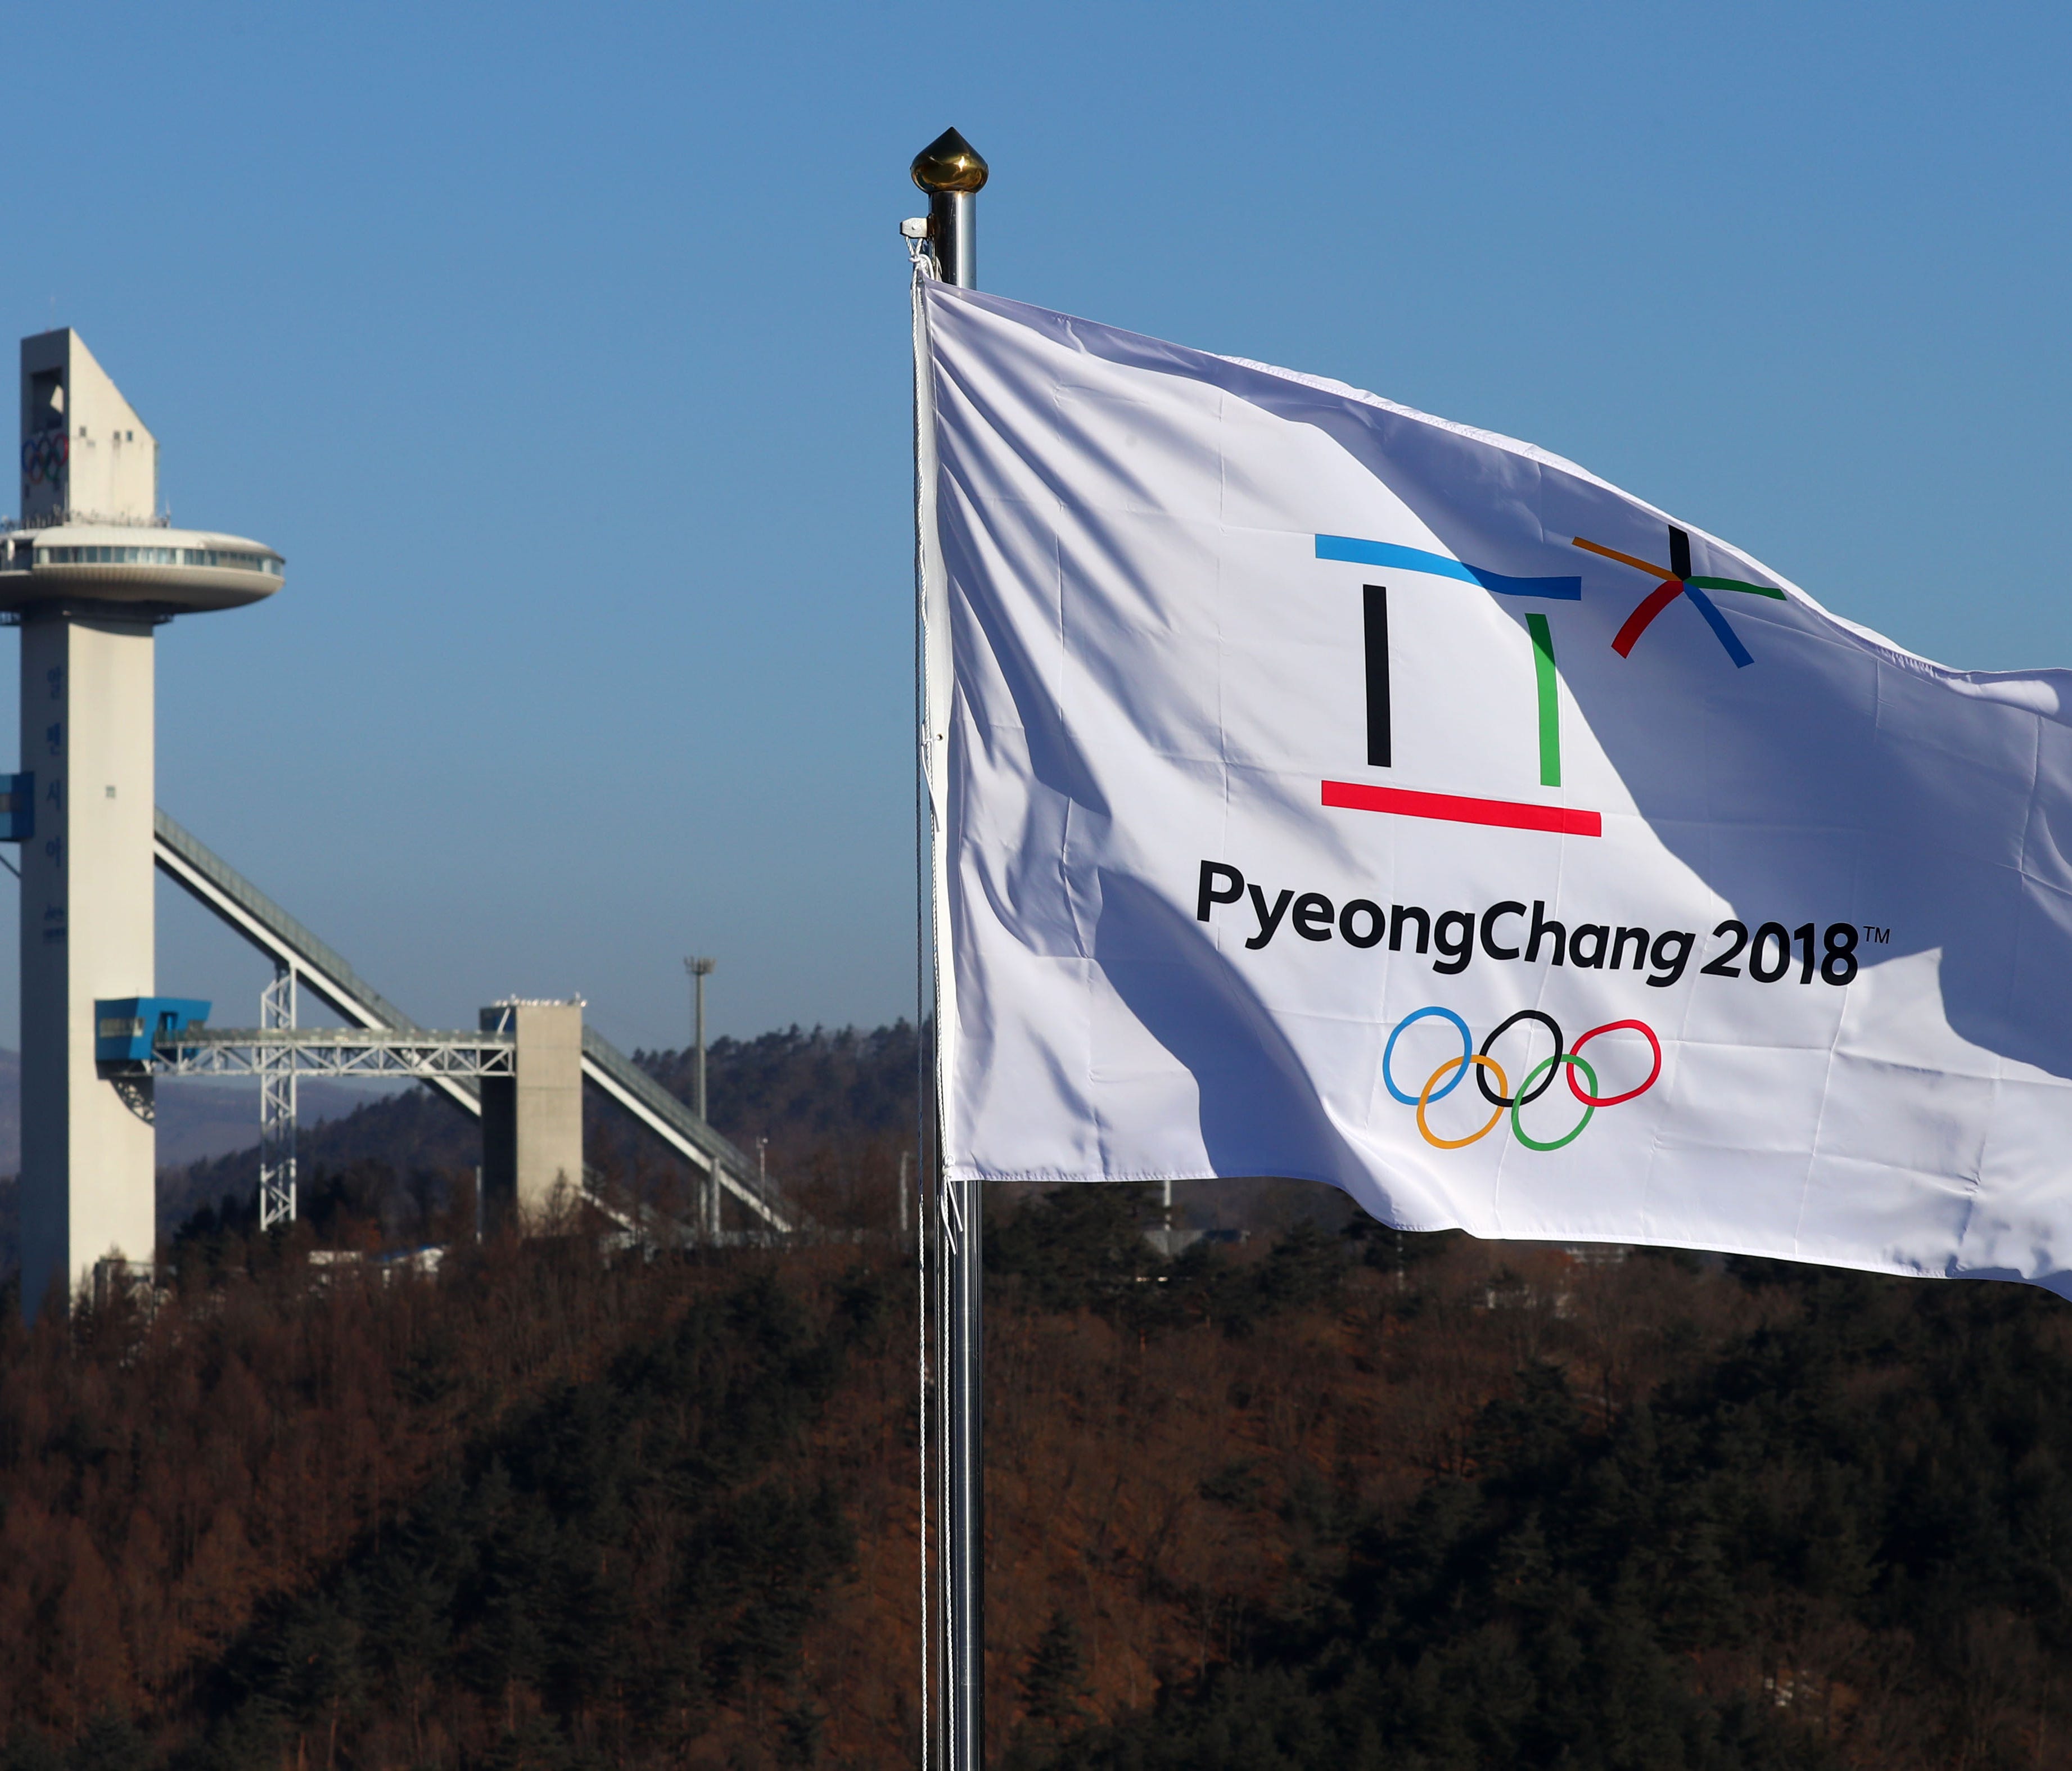 A Pyeongchang 2018 flag whips in the wind Wednesday.